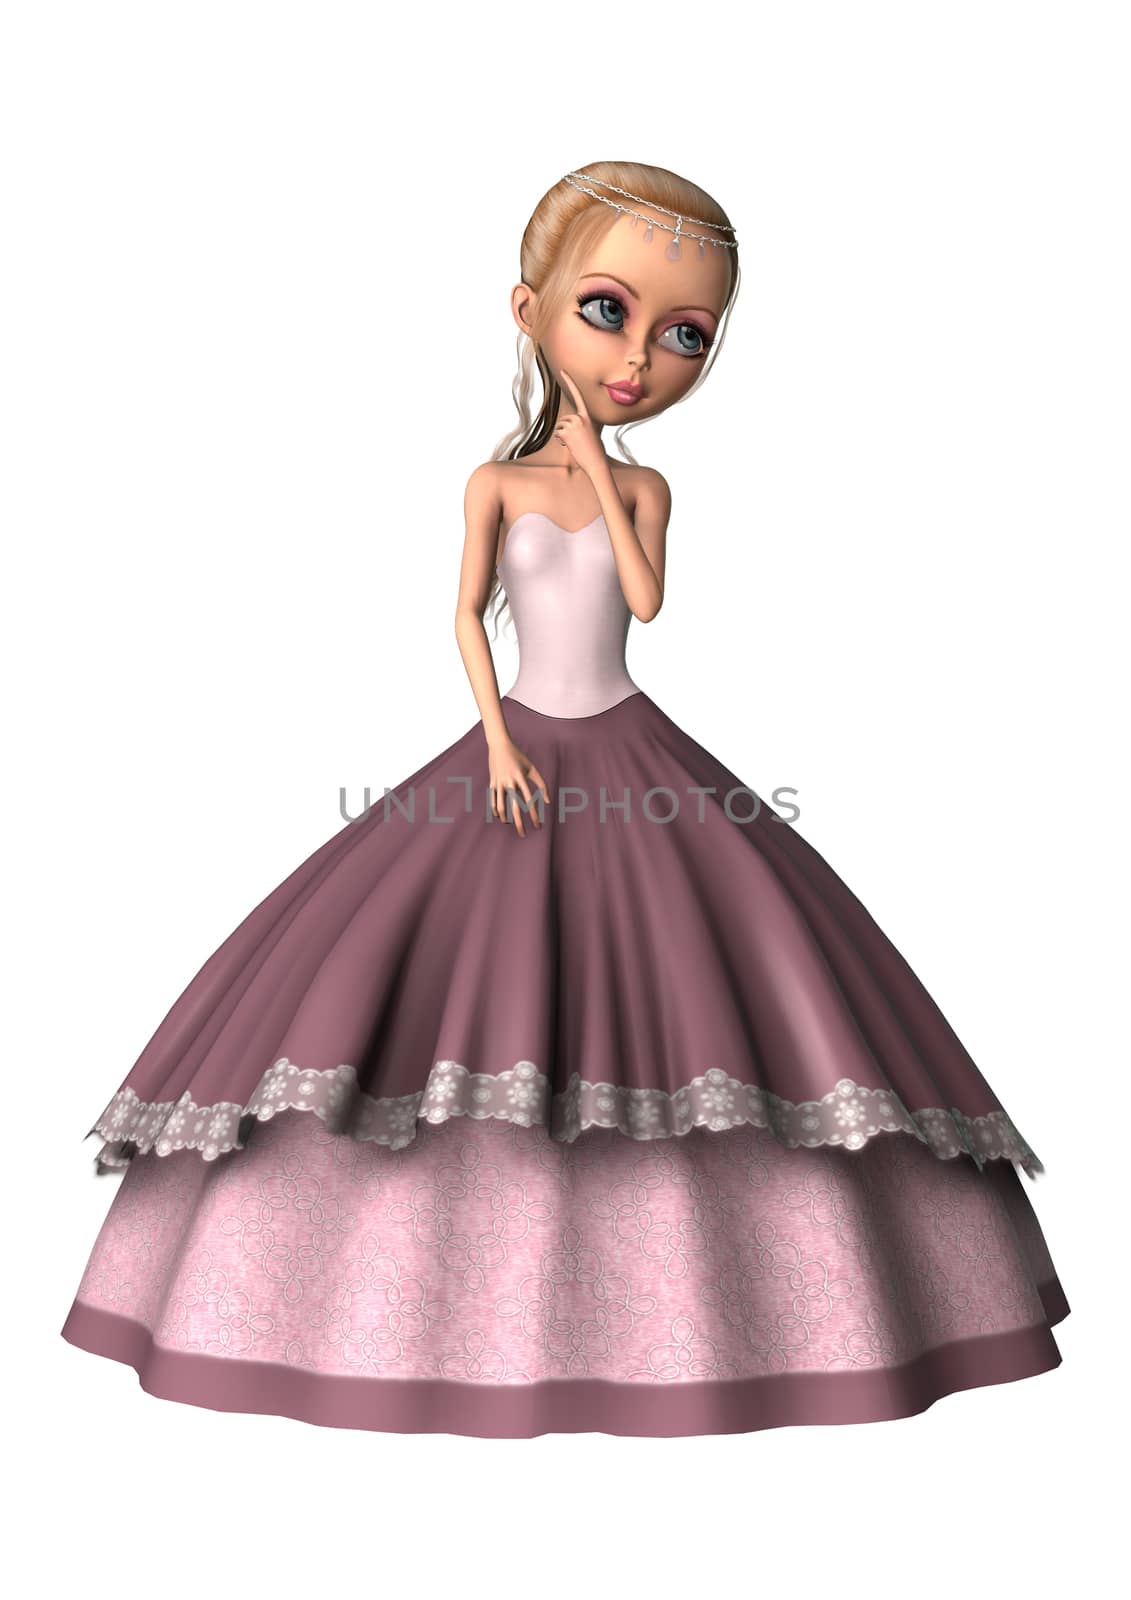 3D digital render of a cute little princess in a pink dress isolated on white background